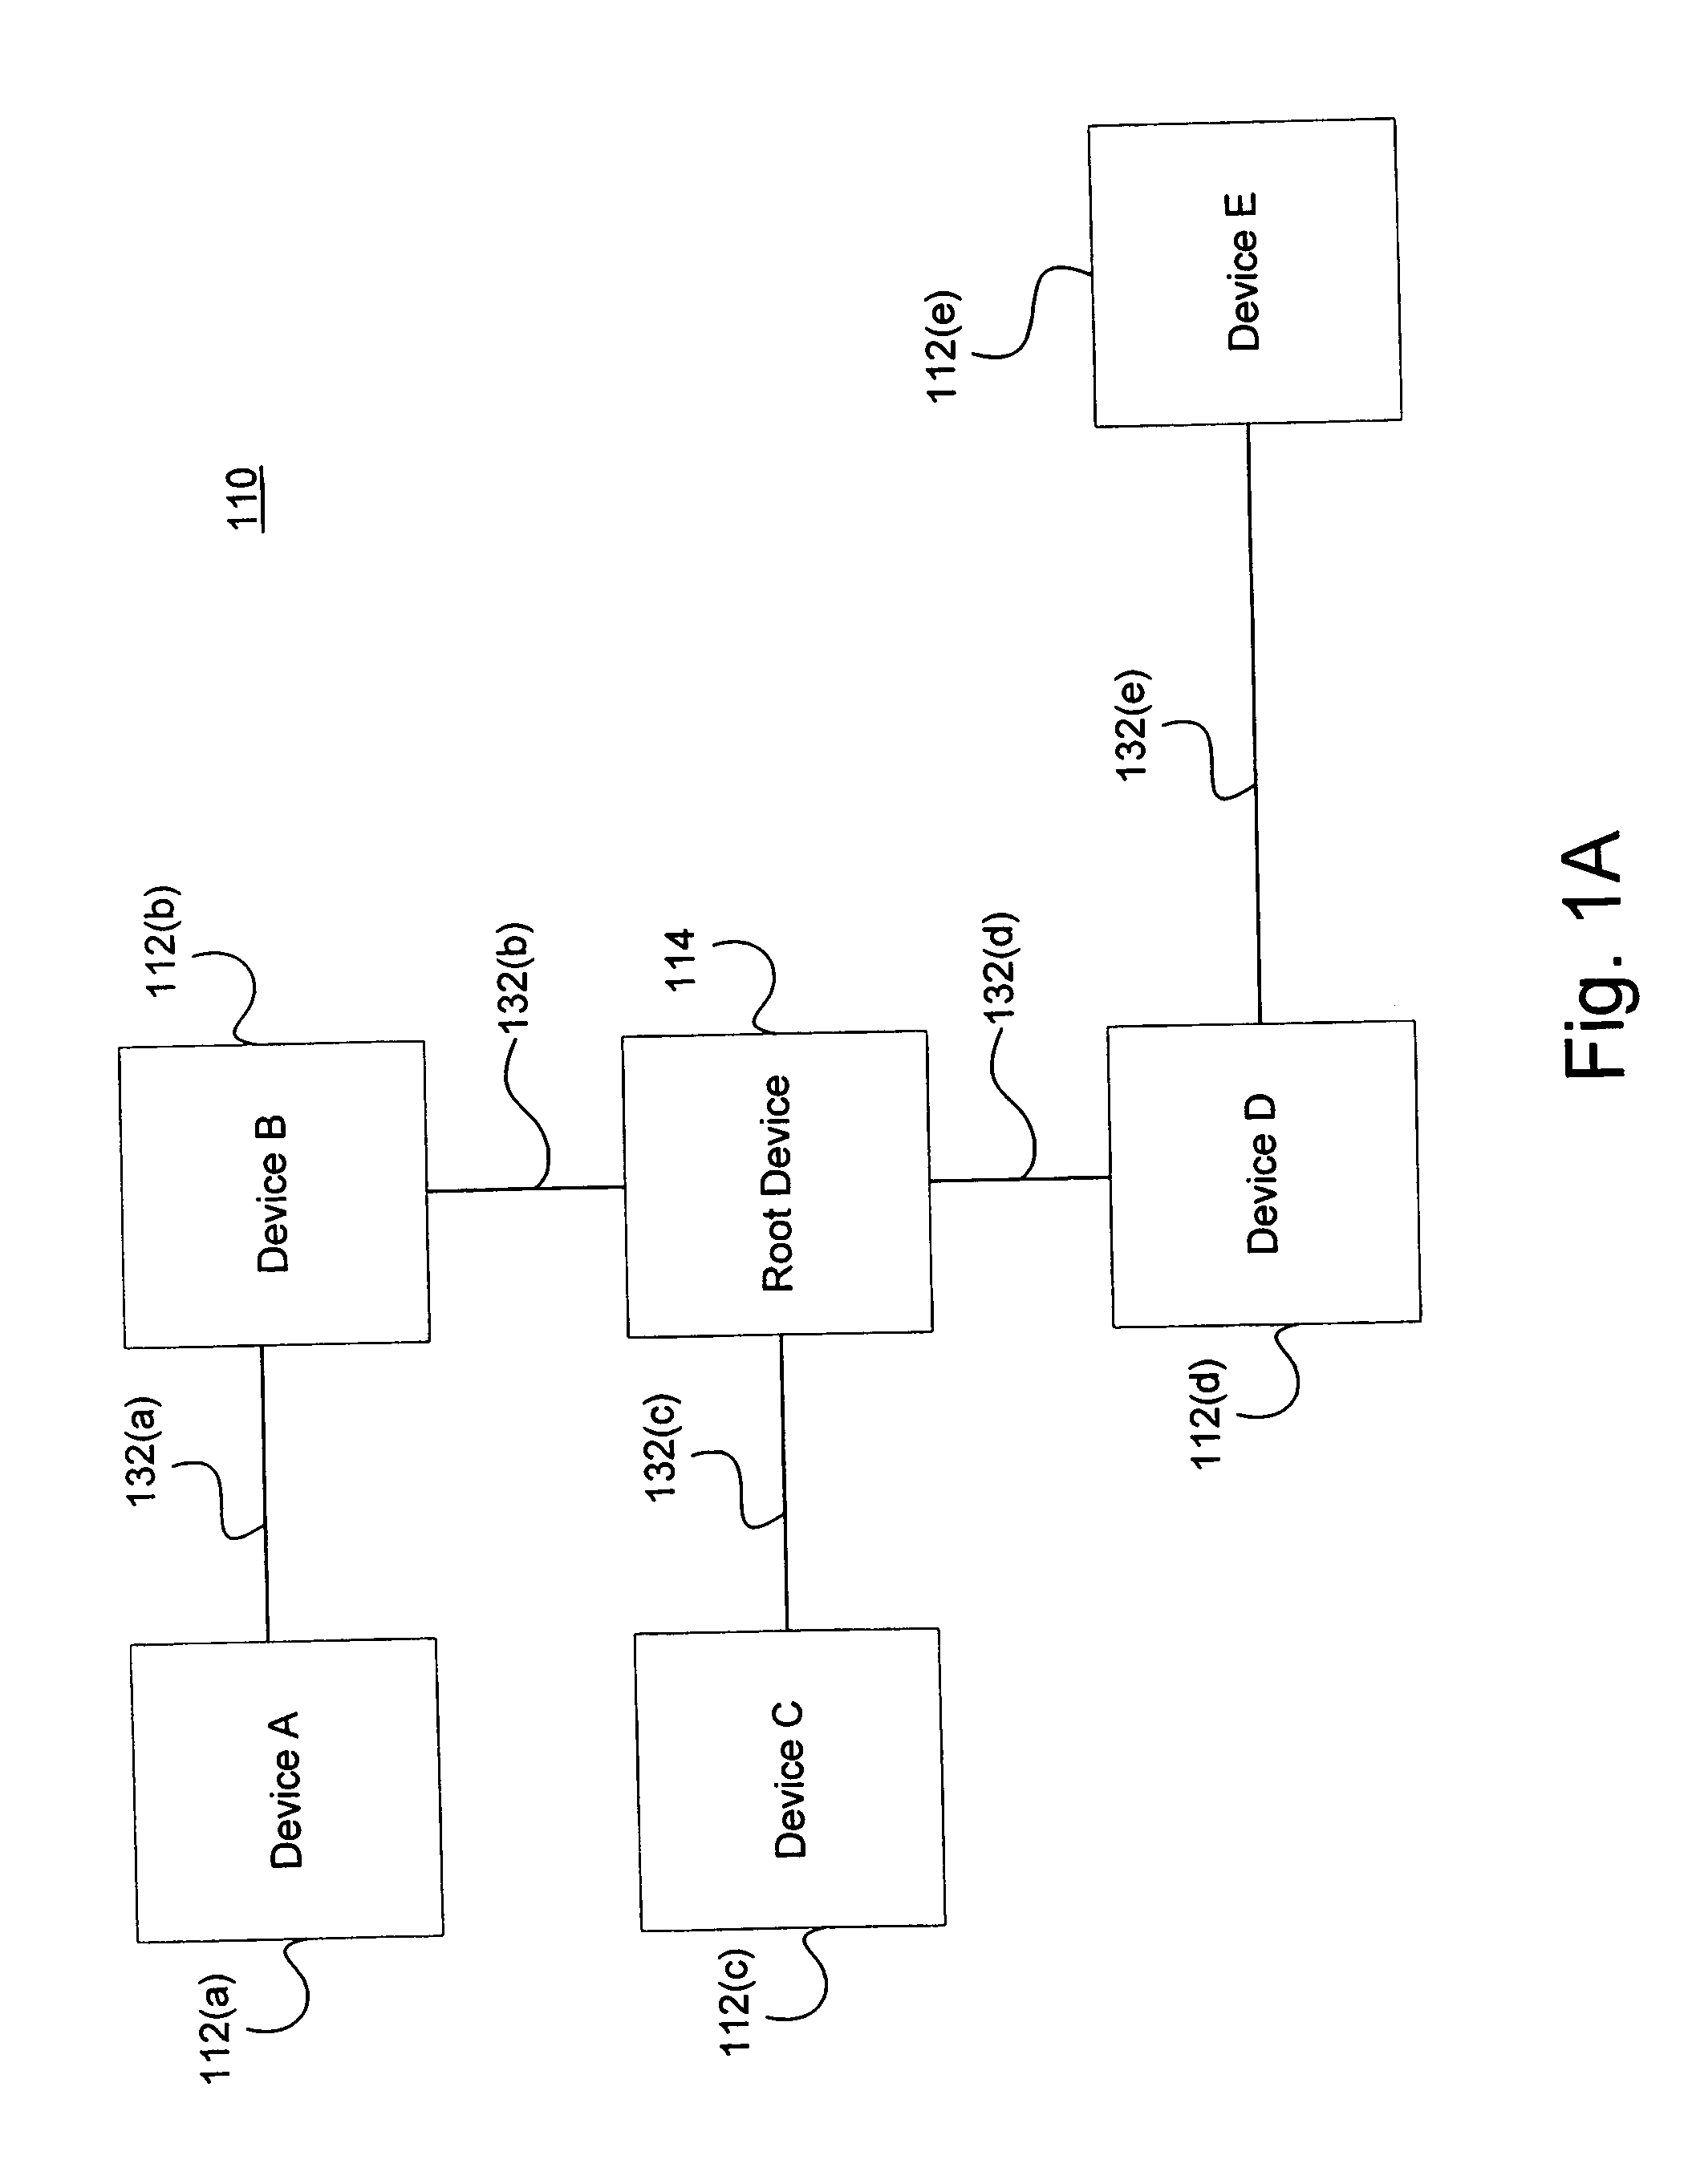 System and method for interactively utilizing a user interface to manage device resources